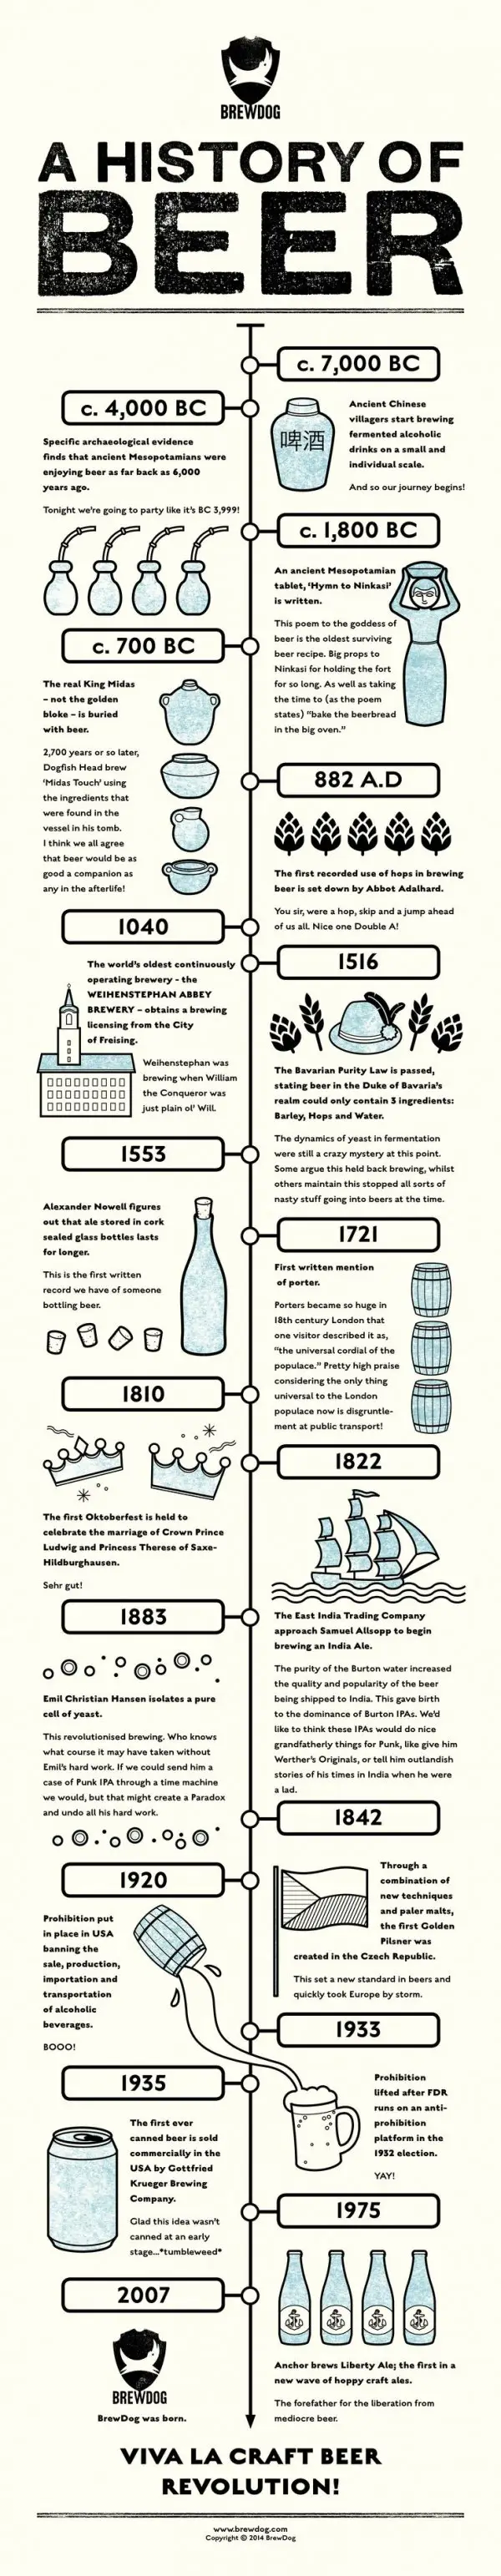 A History of Beer